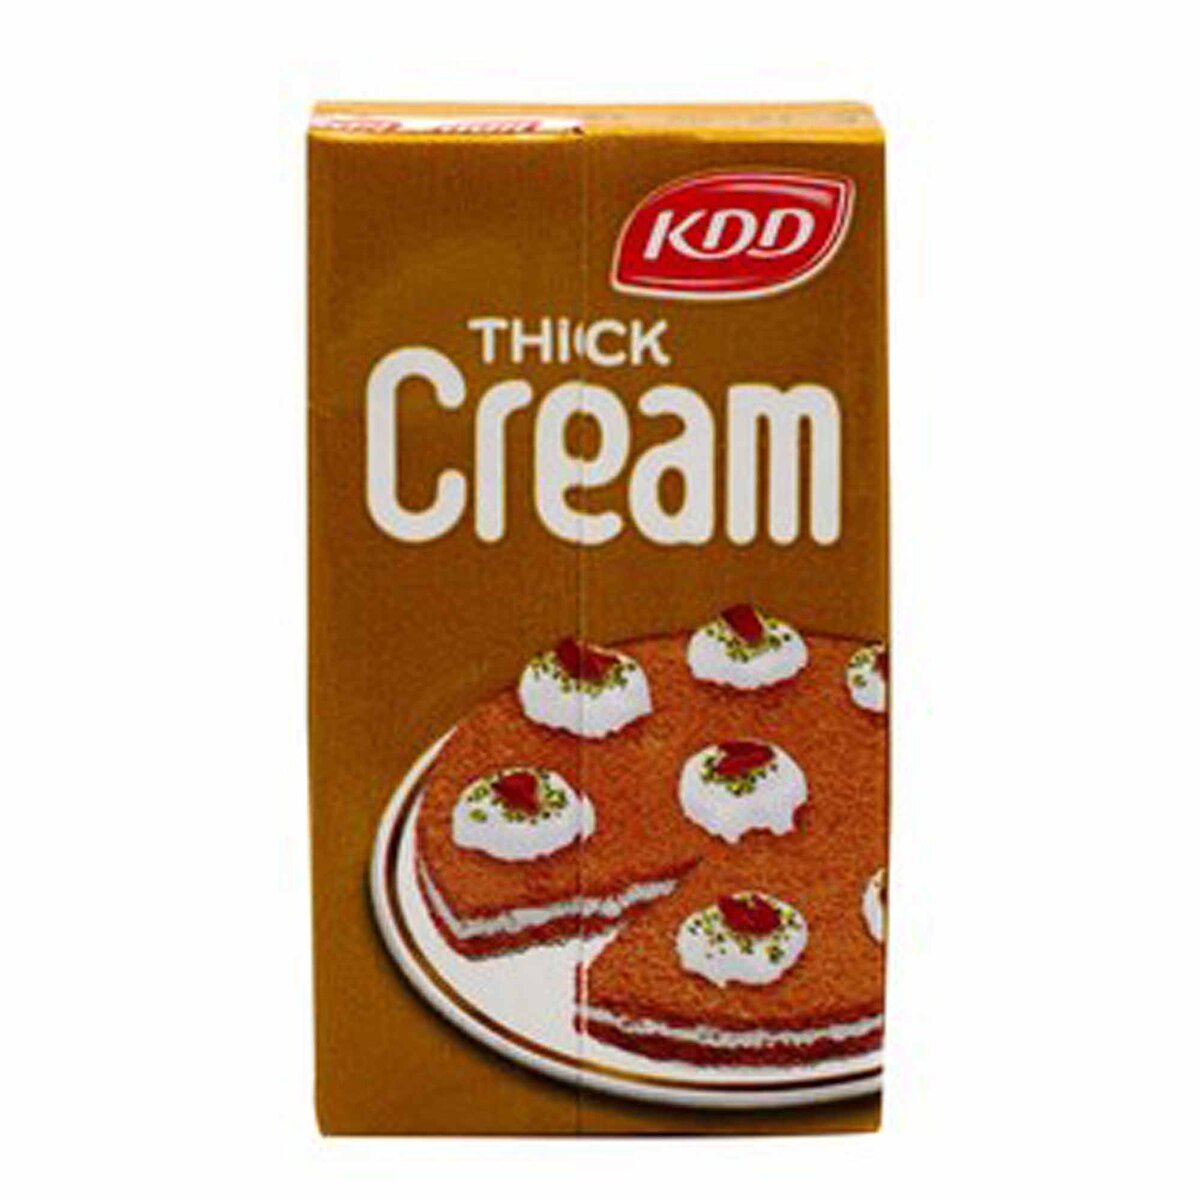 Buy KDD Thick Cream 125 ml Online at Best Price | Other Dairy Products | Lulu KSA in Saudi Arabia